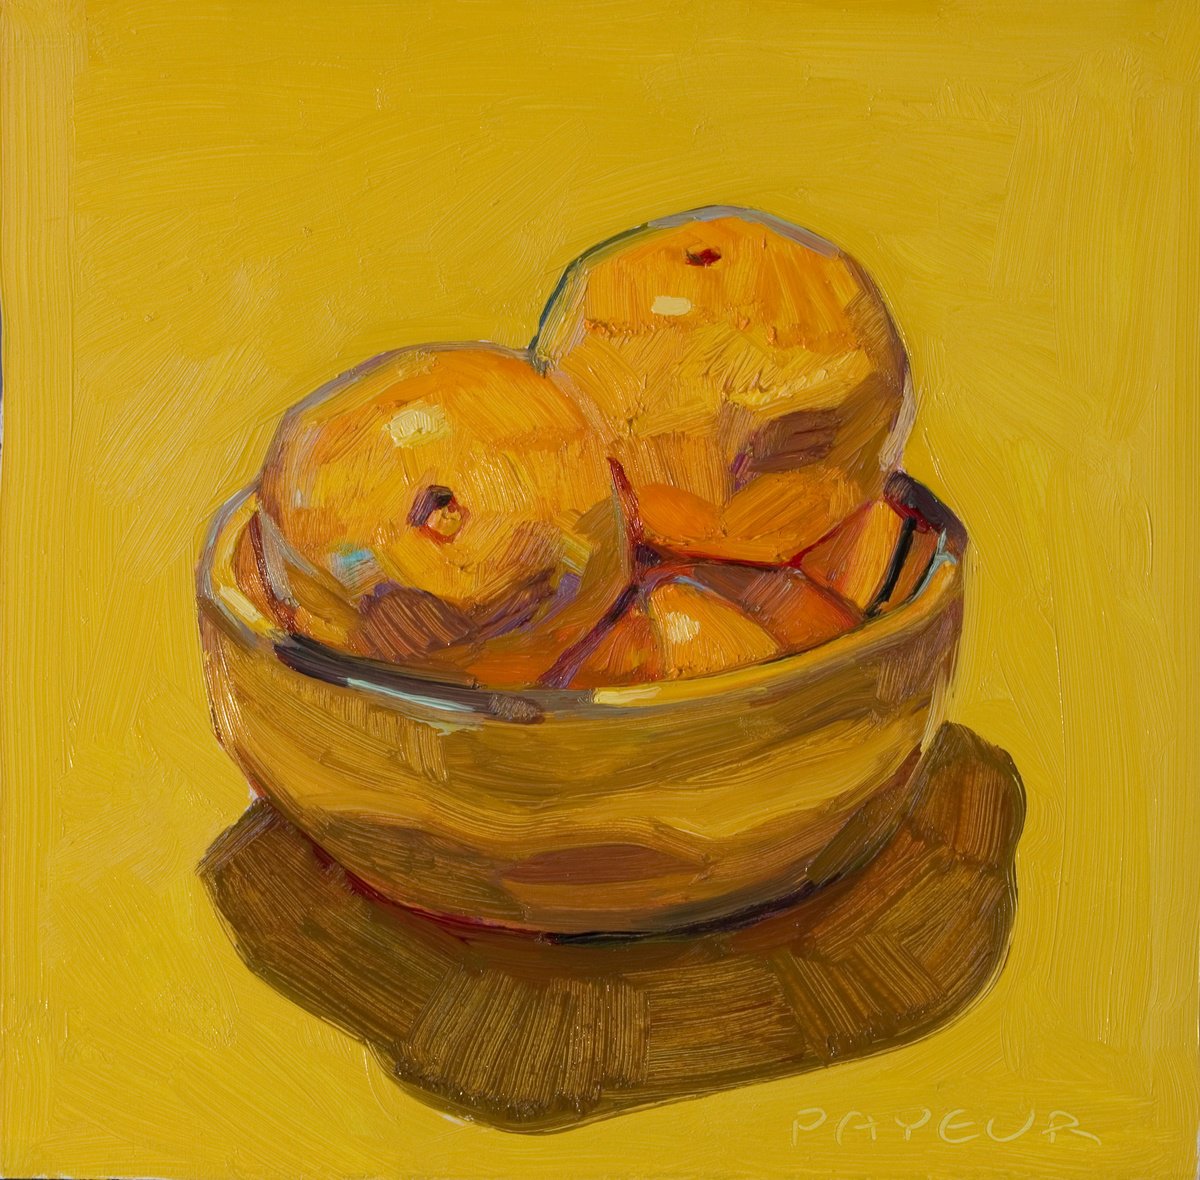 oranges on yellow background by Olivier Payeur